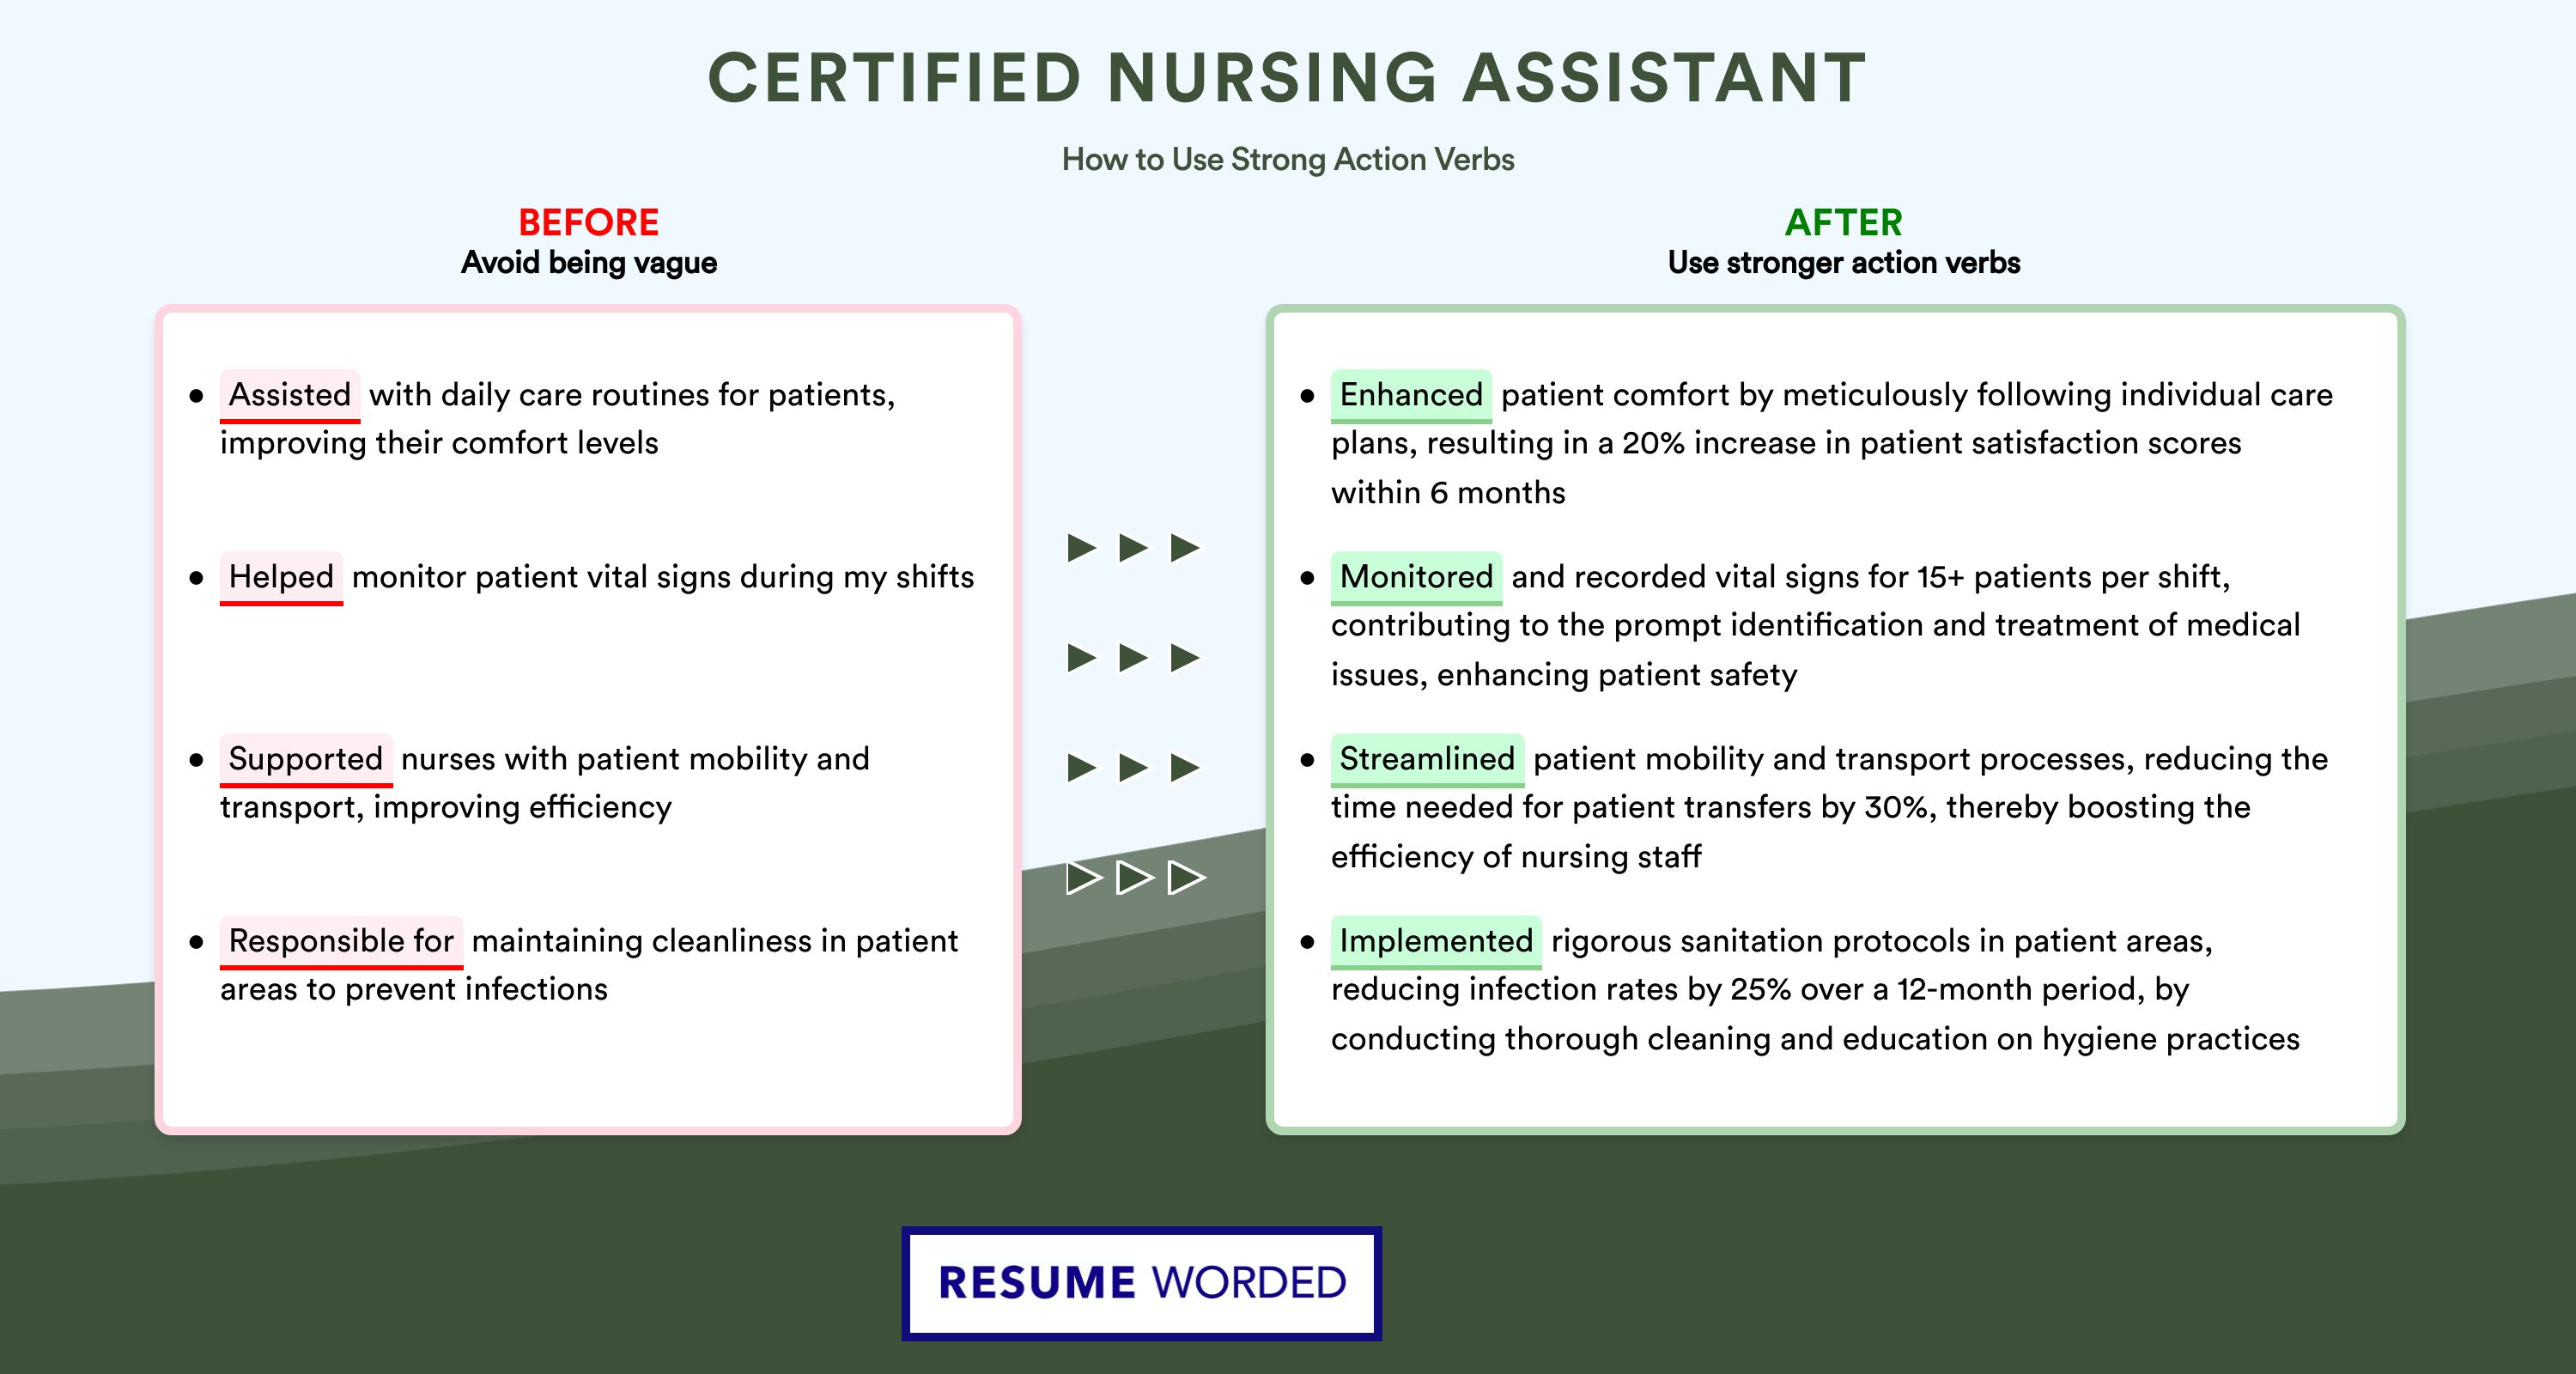 Action Verbs for Certified Nursing Assistant